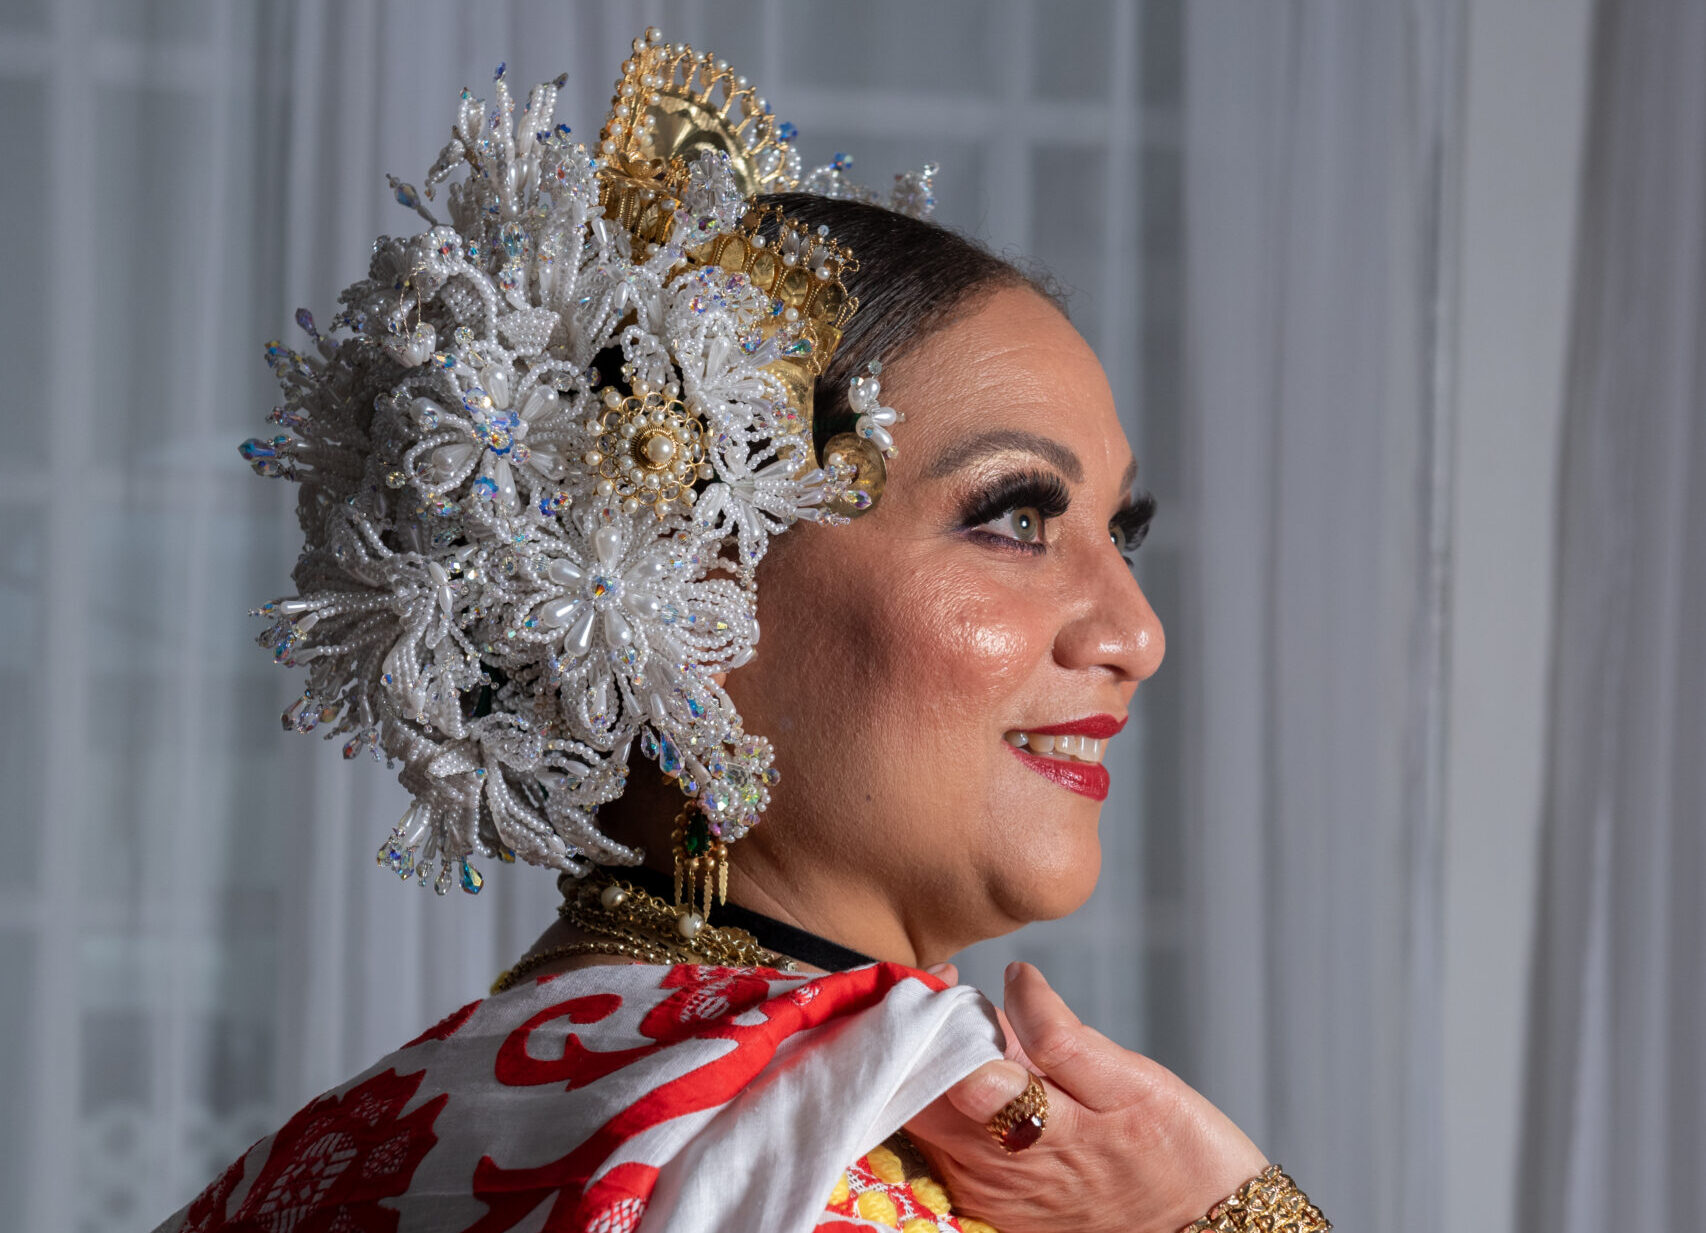 A woman in a red and white embroidered dress looks off to the side, showing the elaborate white and gold beaded headpiece on the side of her head.